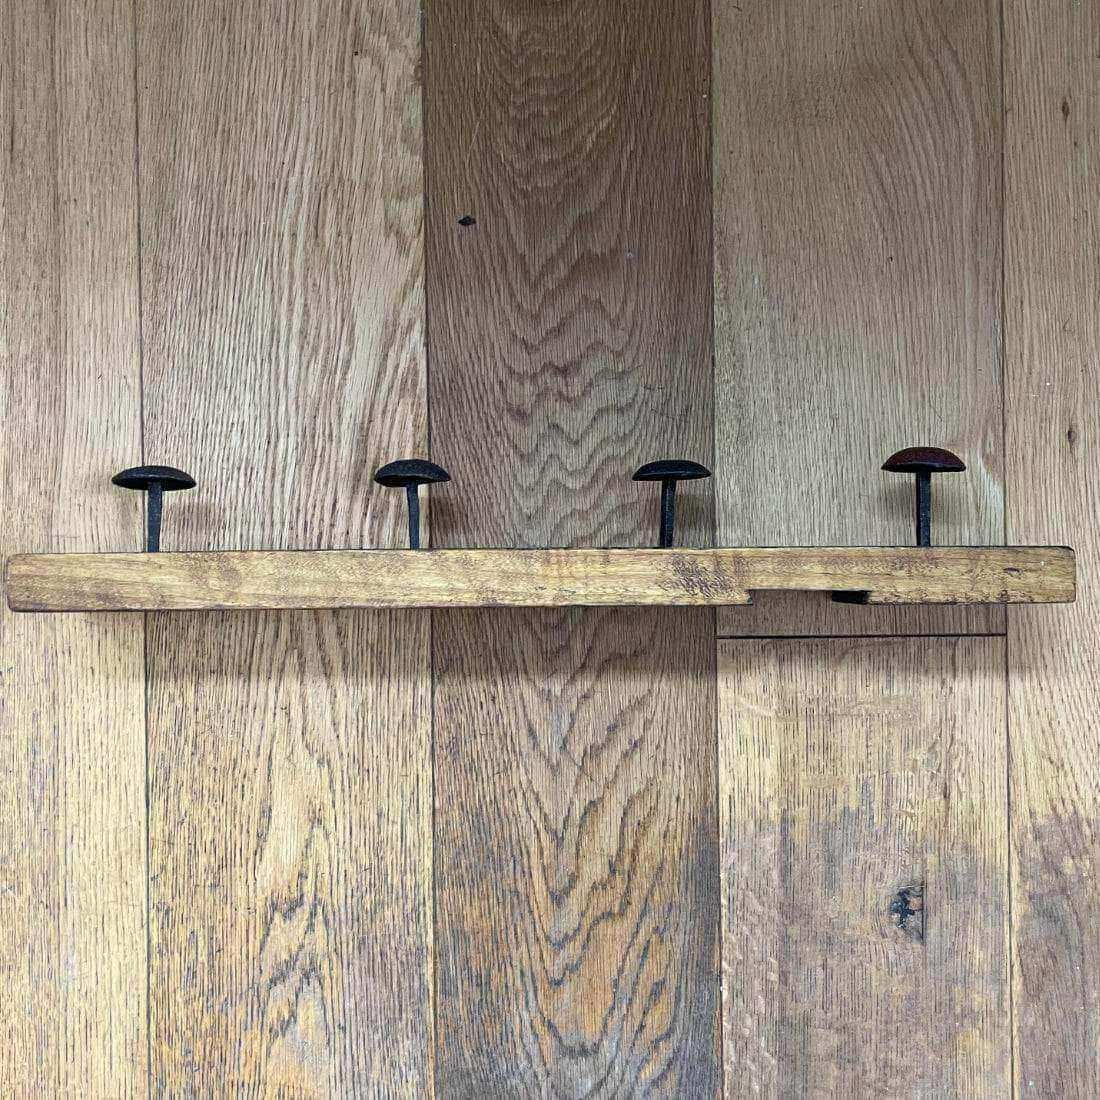 Rustic Wooden Up Cycled 4 Peg Hook Rail - The Farthing